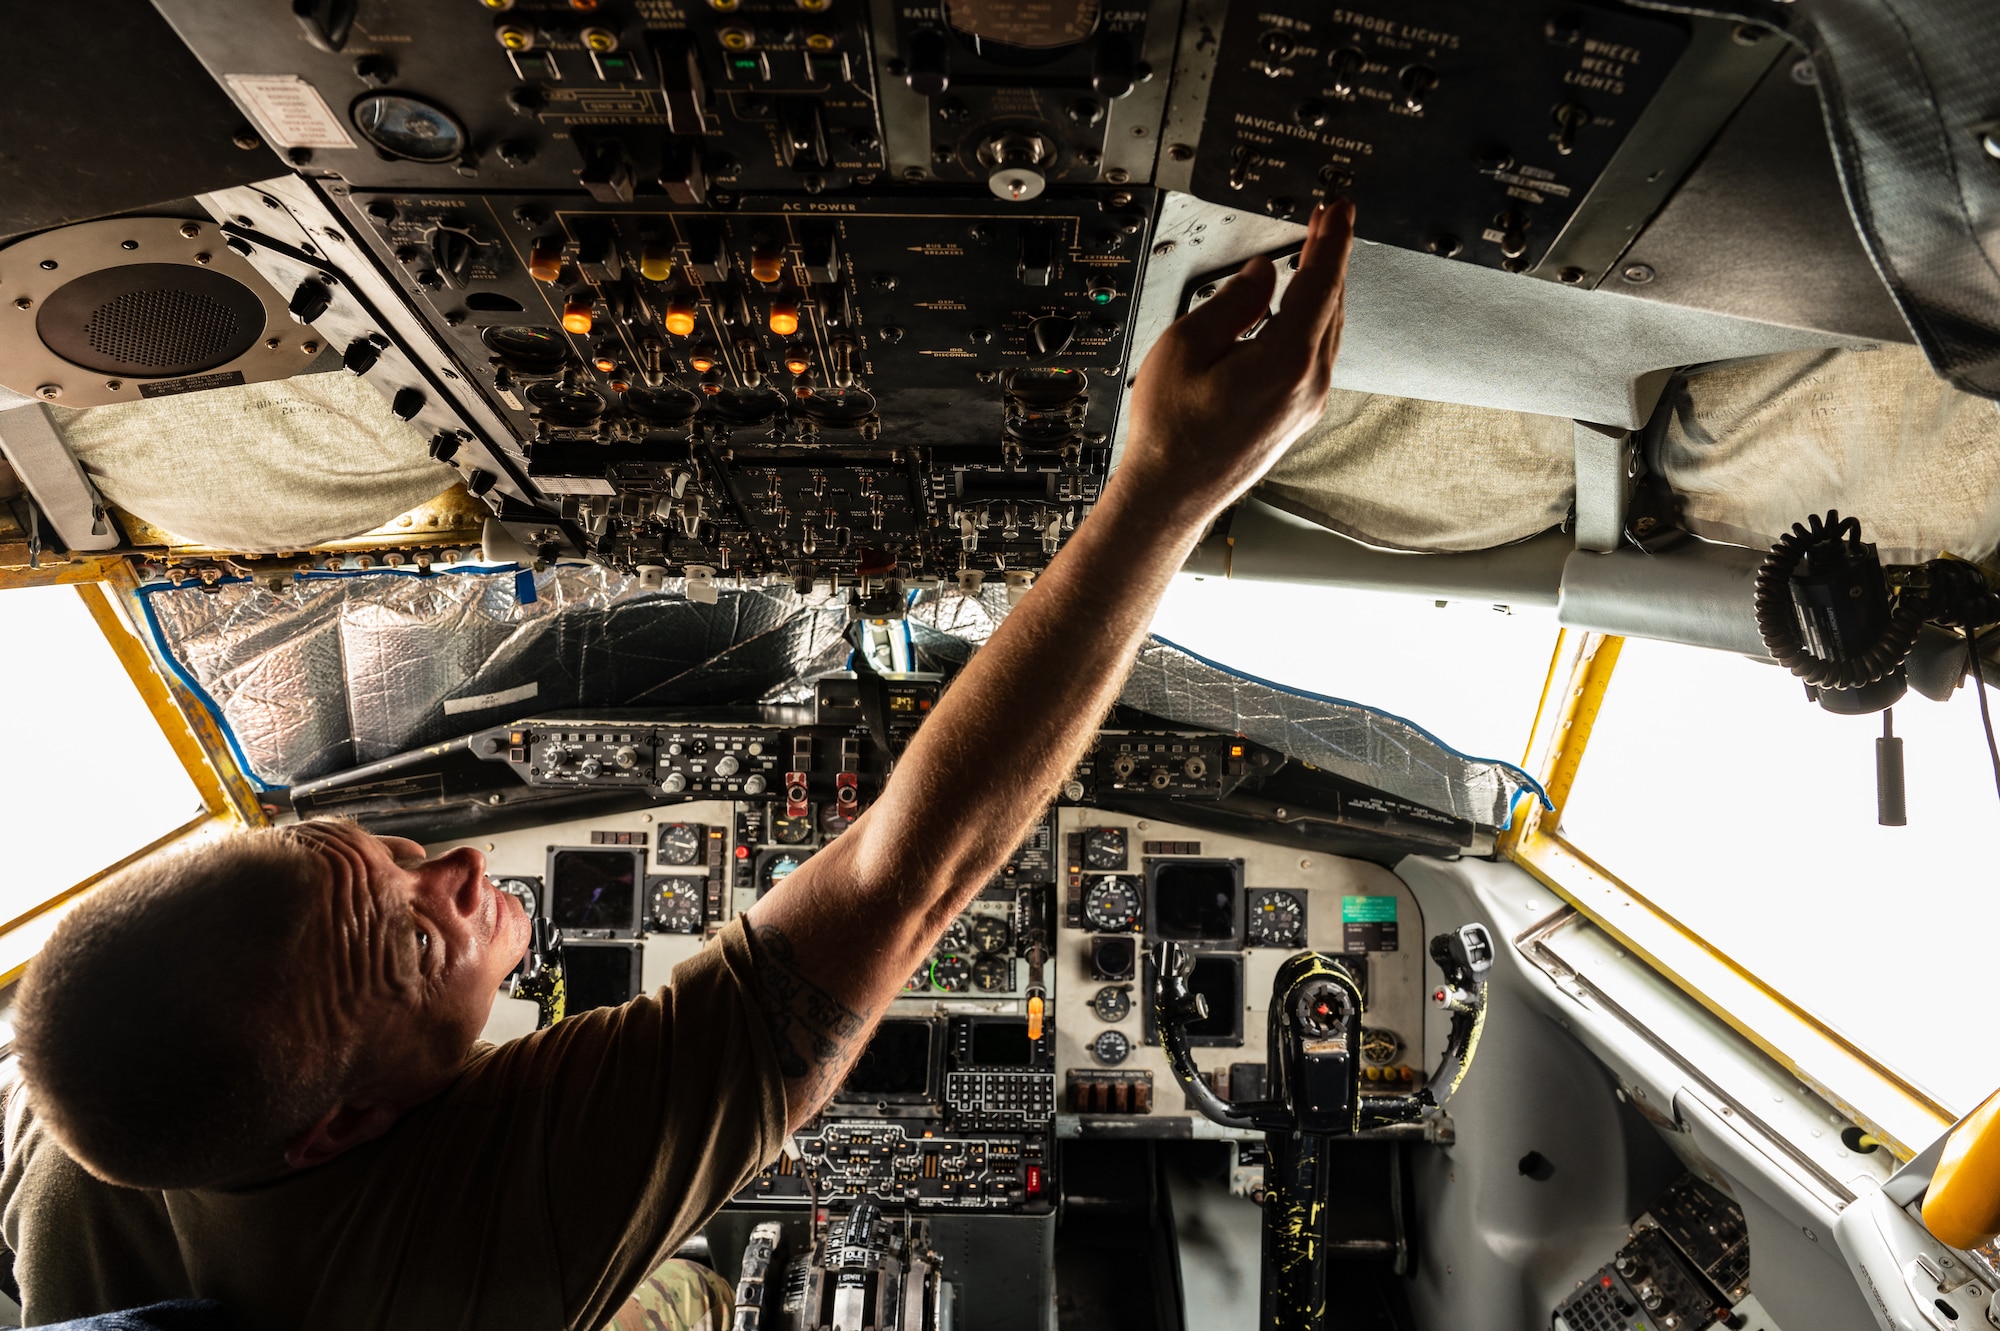 U.S. Air Force Col. Randy D. Schwinler, Commander 379th Expeditionary Maintenance Group, Al Udeid Air Base, Qatar, conducts a pre-flight check on a KC-135, July 9, 2022. Schwinler worked during this process to test the functionality of cockpit controls both inside and outside of the Aircraft. (U.S. Air Force photo by Staff Sgt. Dana Tourtellotte)